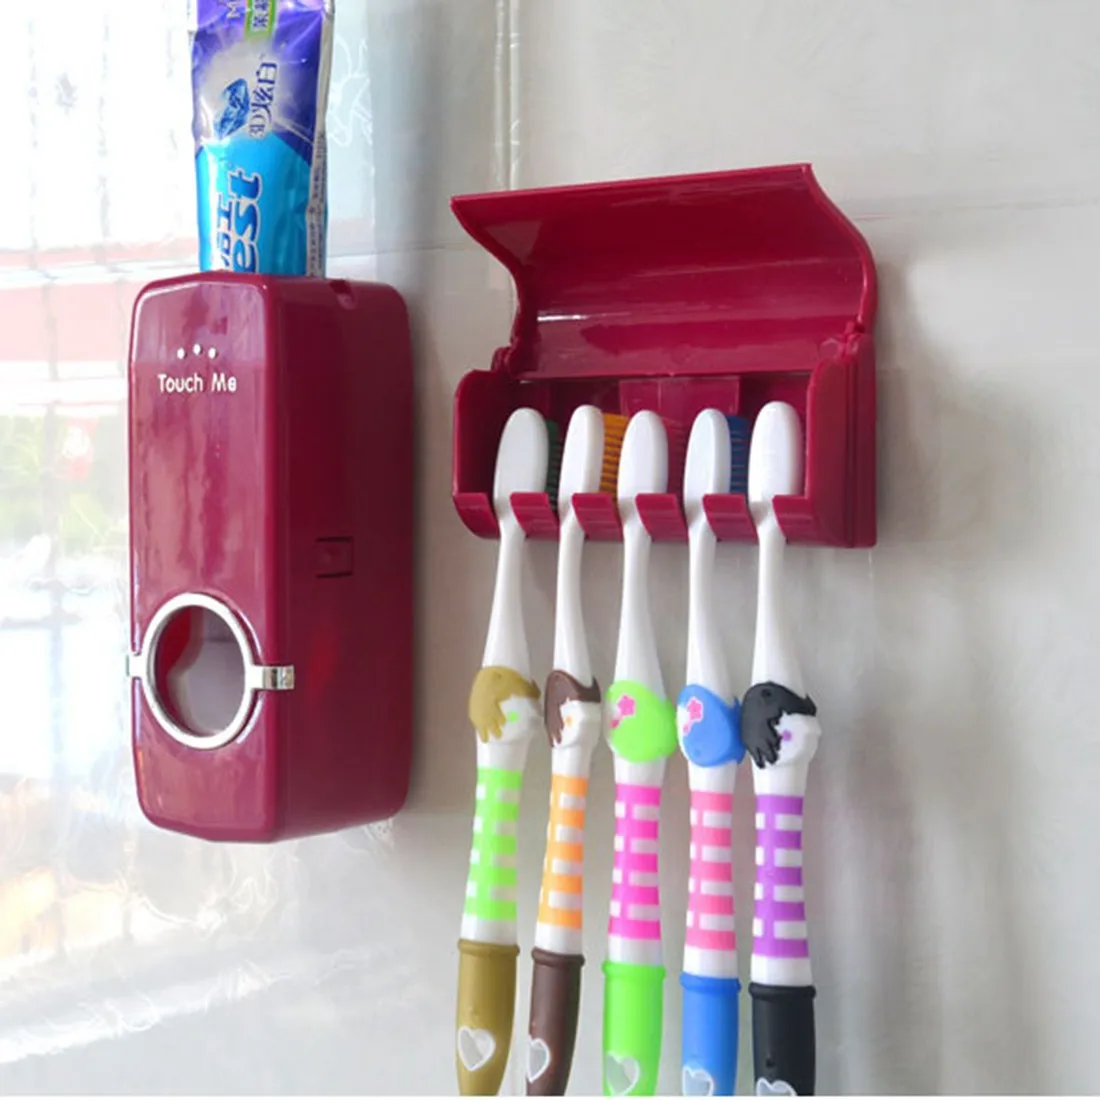 New Wall Mount Stand Auto Automatic Toothpaste Dispenser+5 Toothbrush Holder Set 